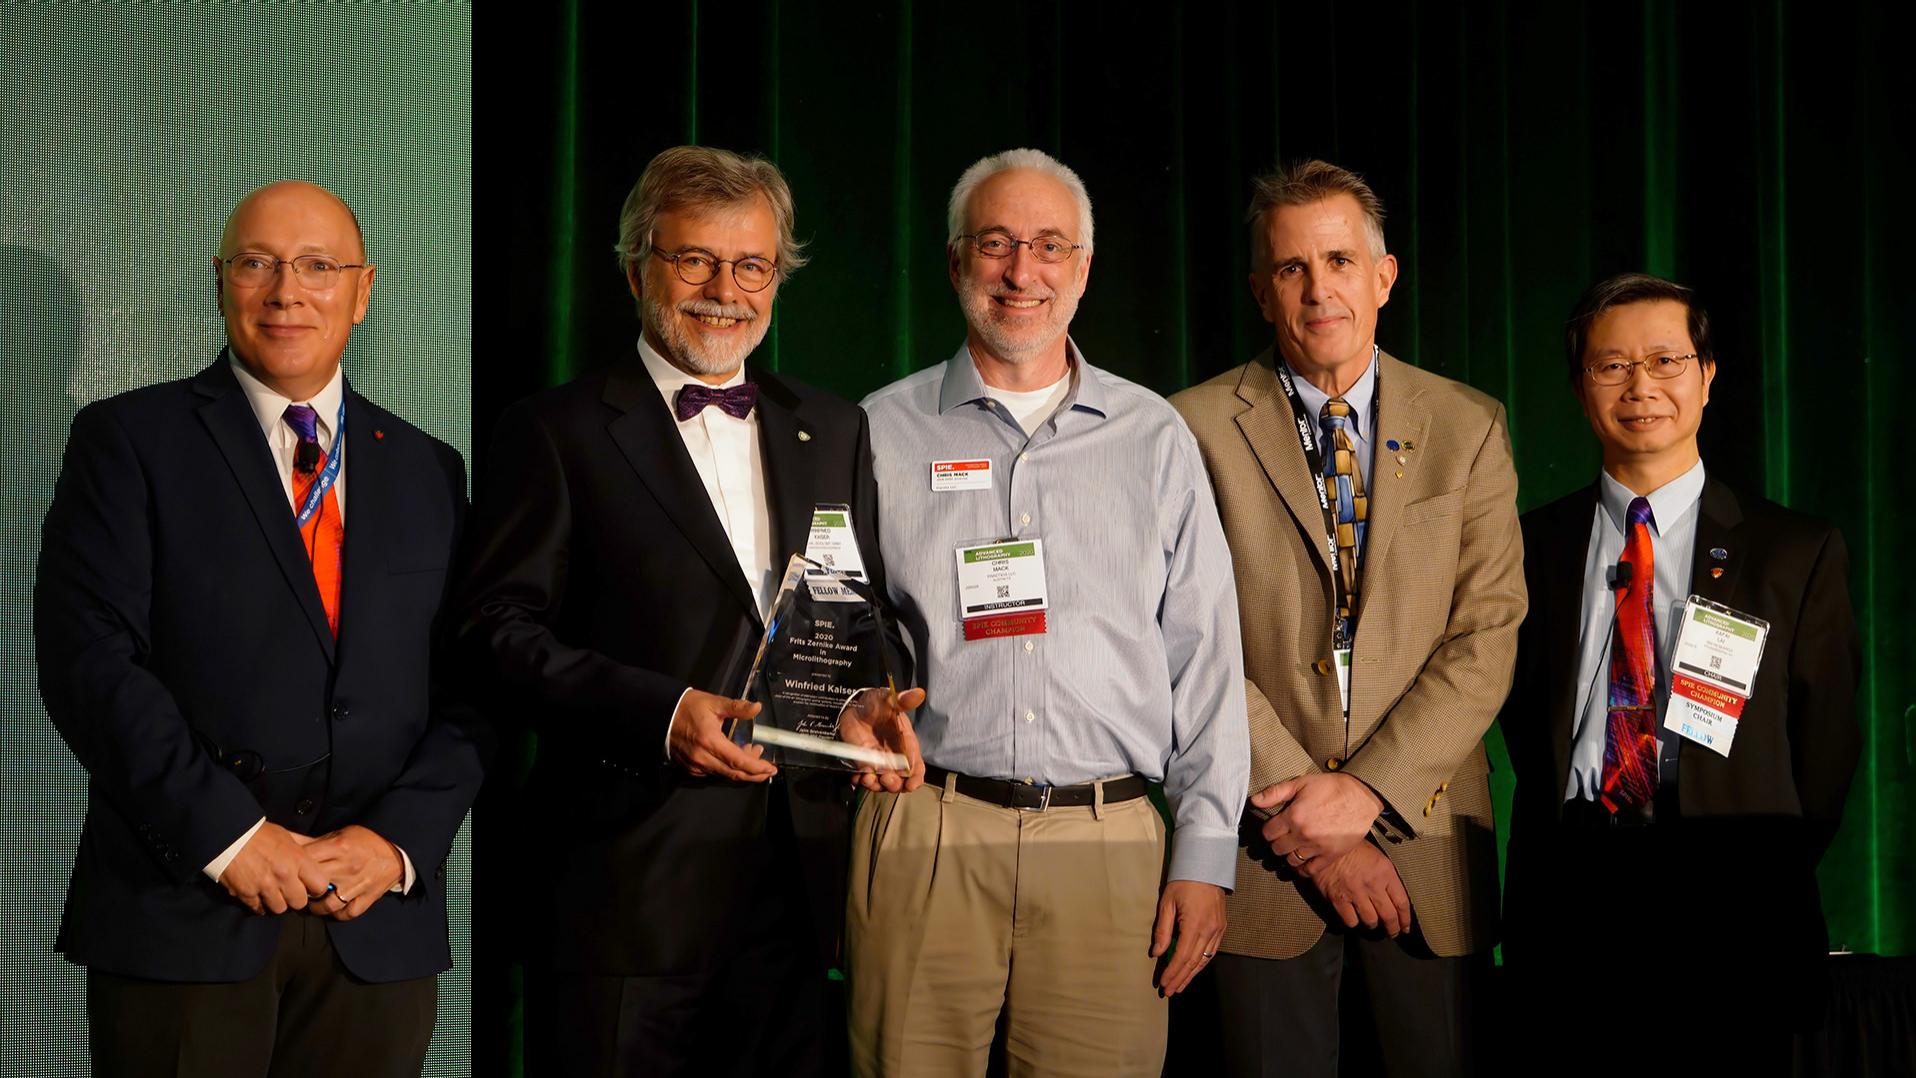 Winfried Kaiser was honored with the SPIE Frits Zernike Award for Microlithography